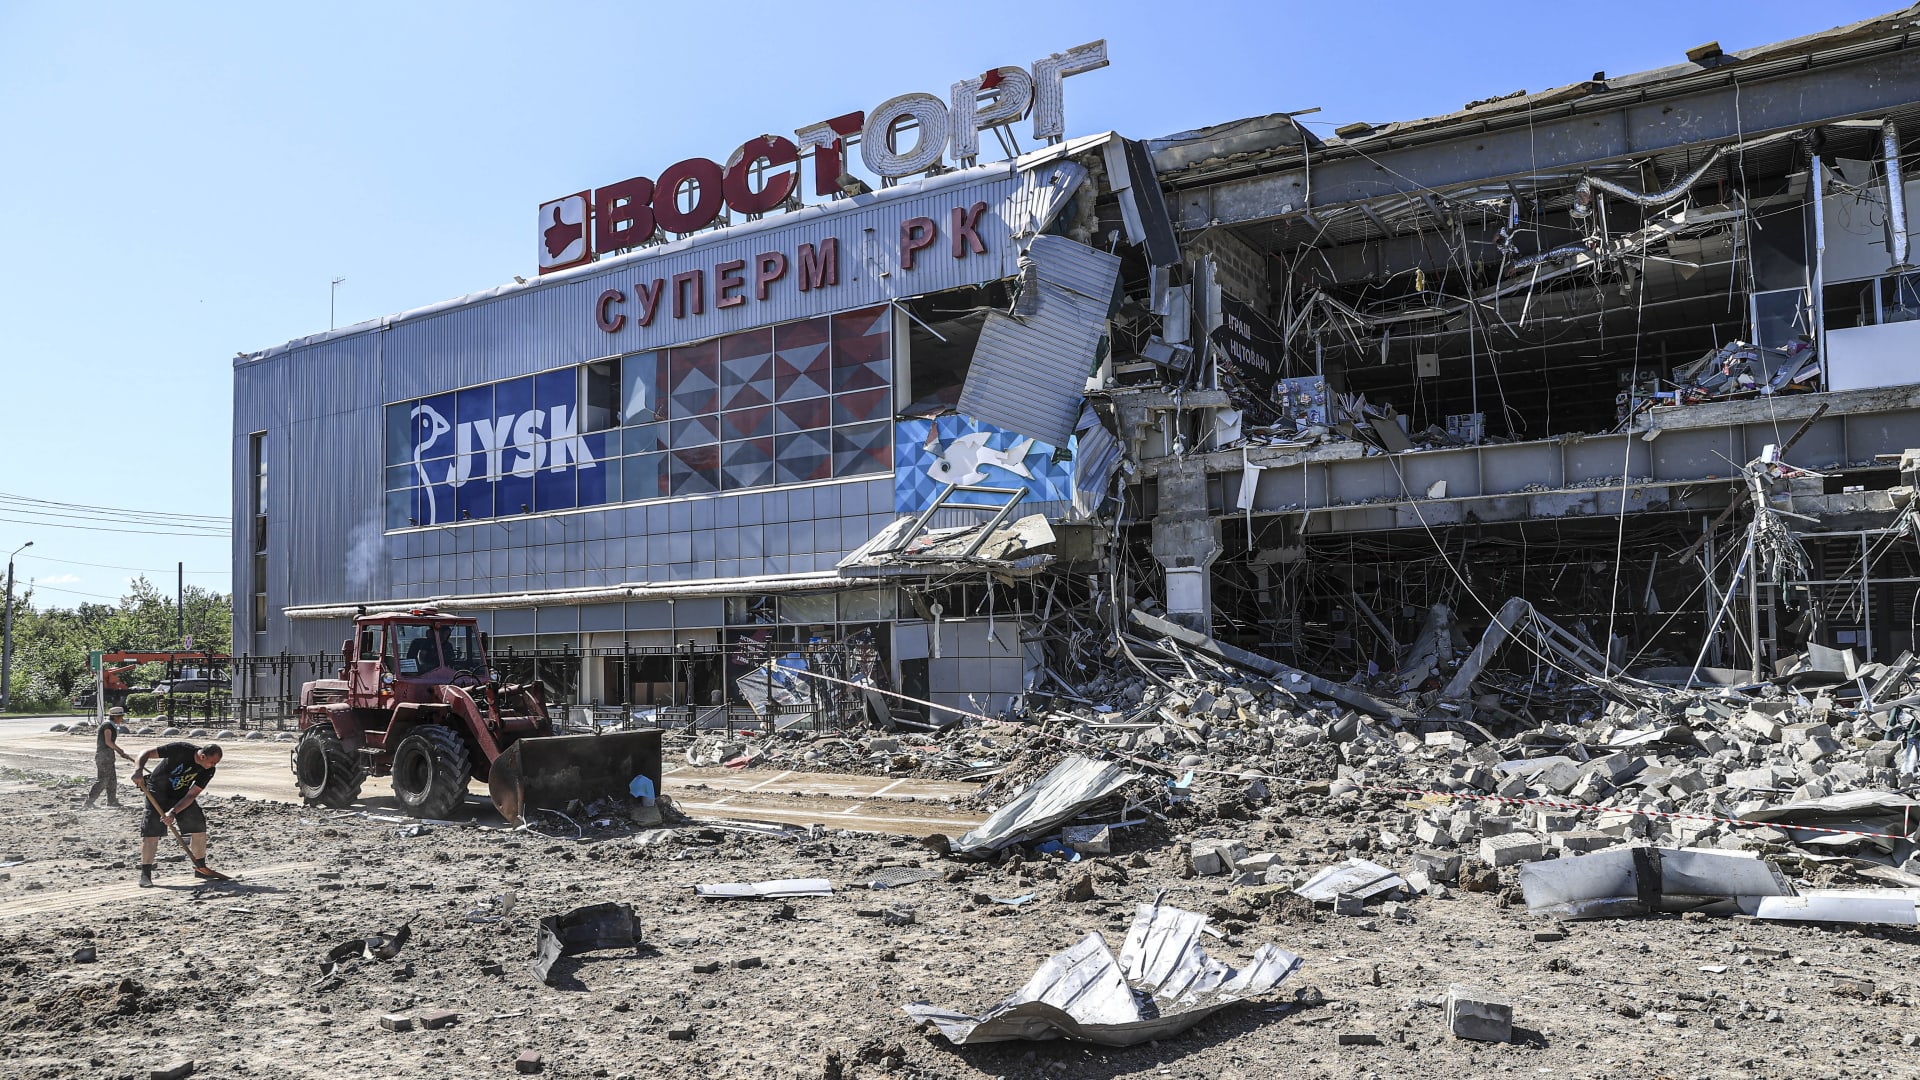 A view of the destroyed shopping mall due to shelling in Kharkiv, Ukraine on June 08, 2022.